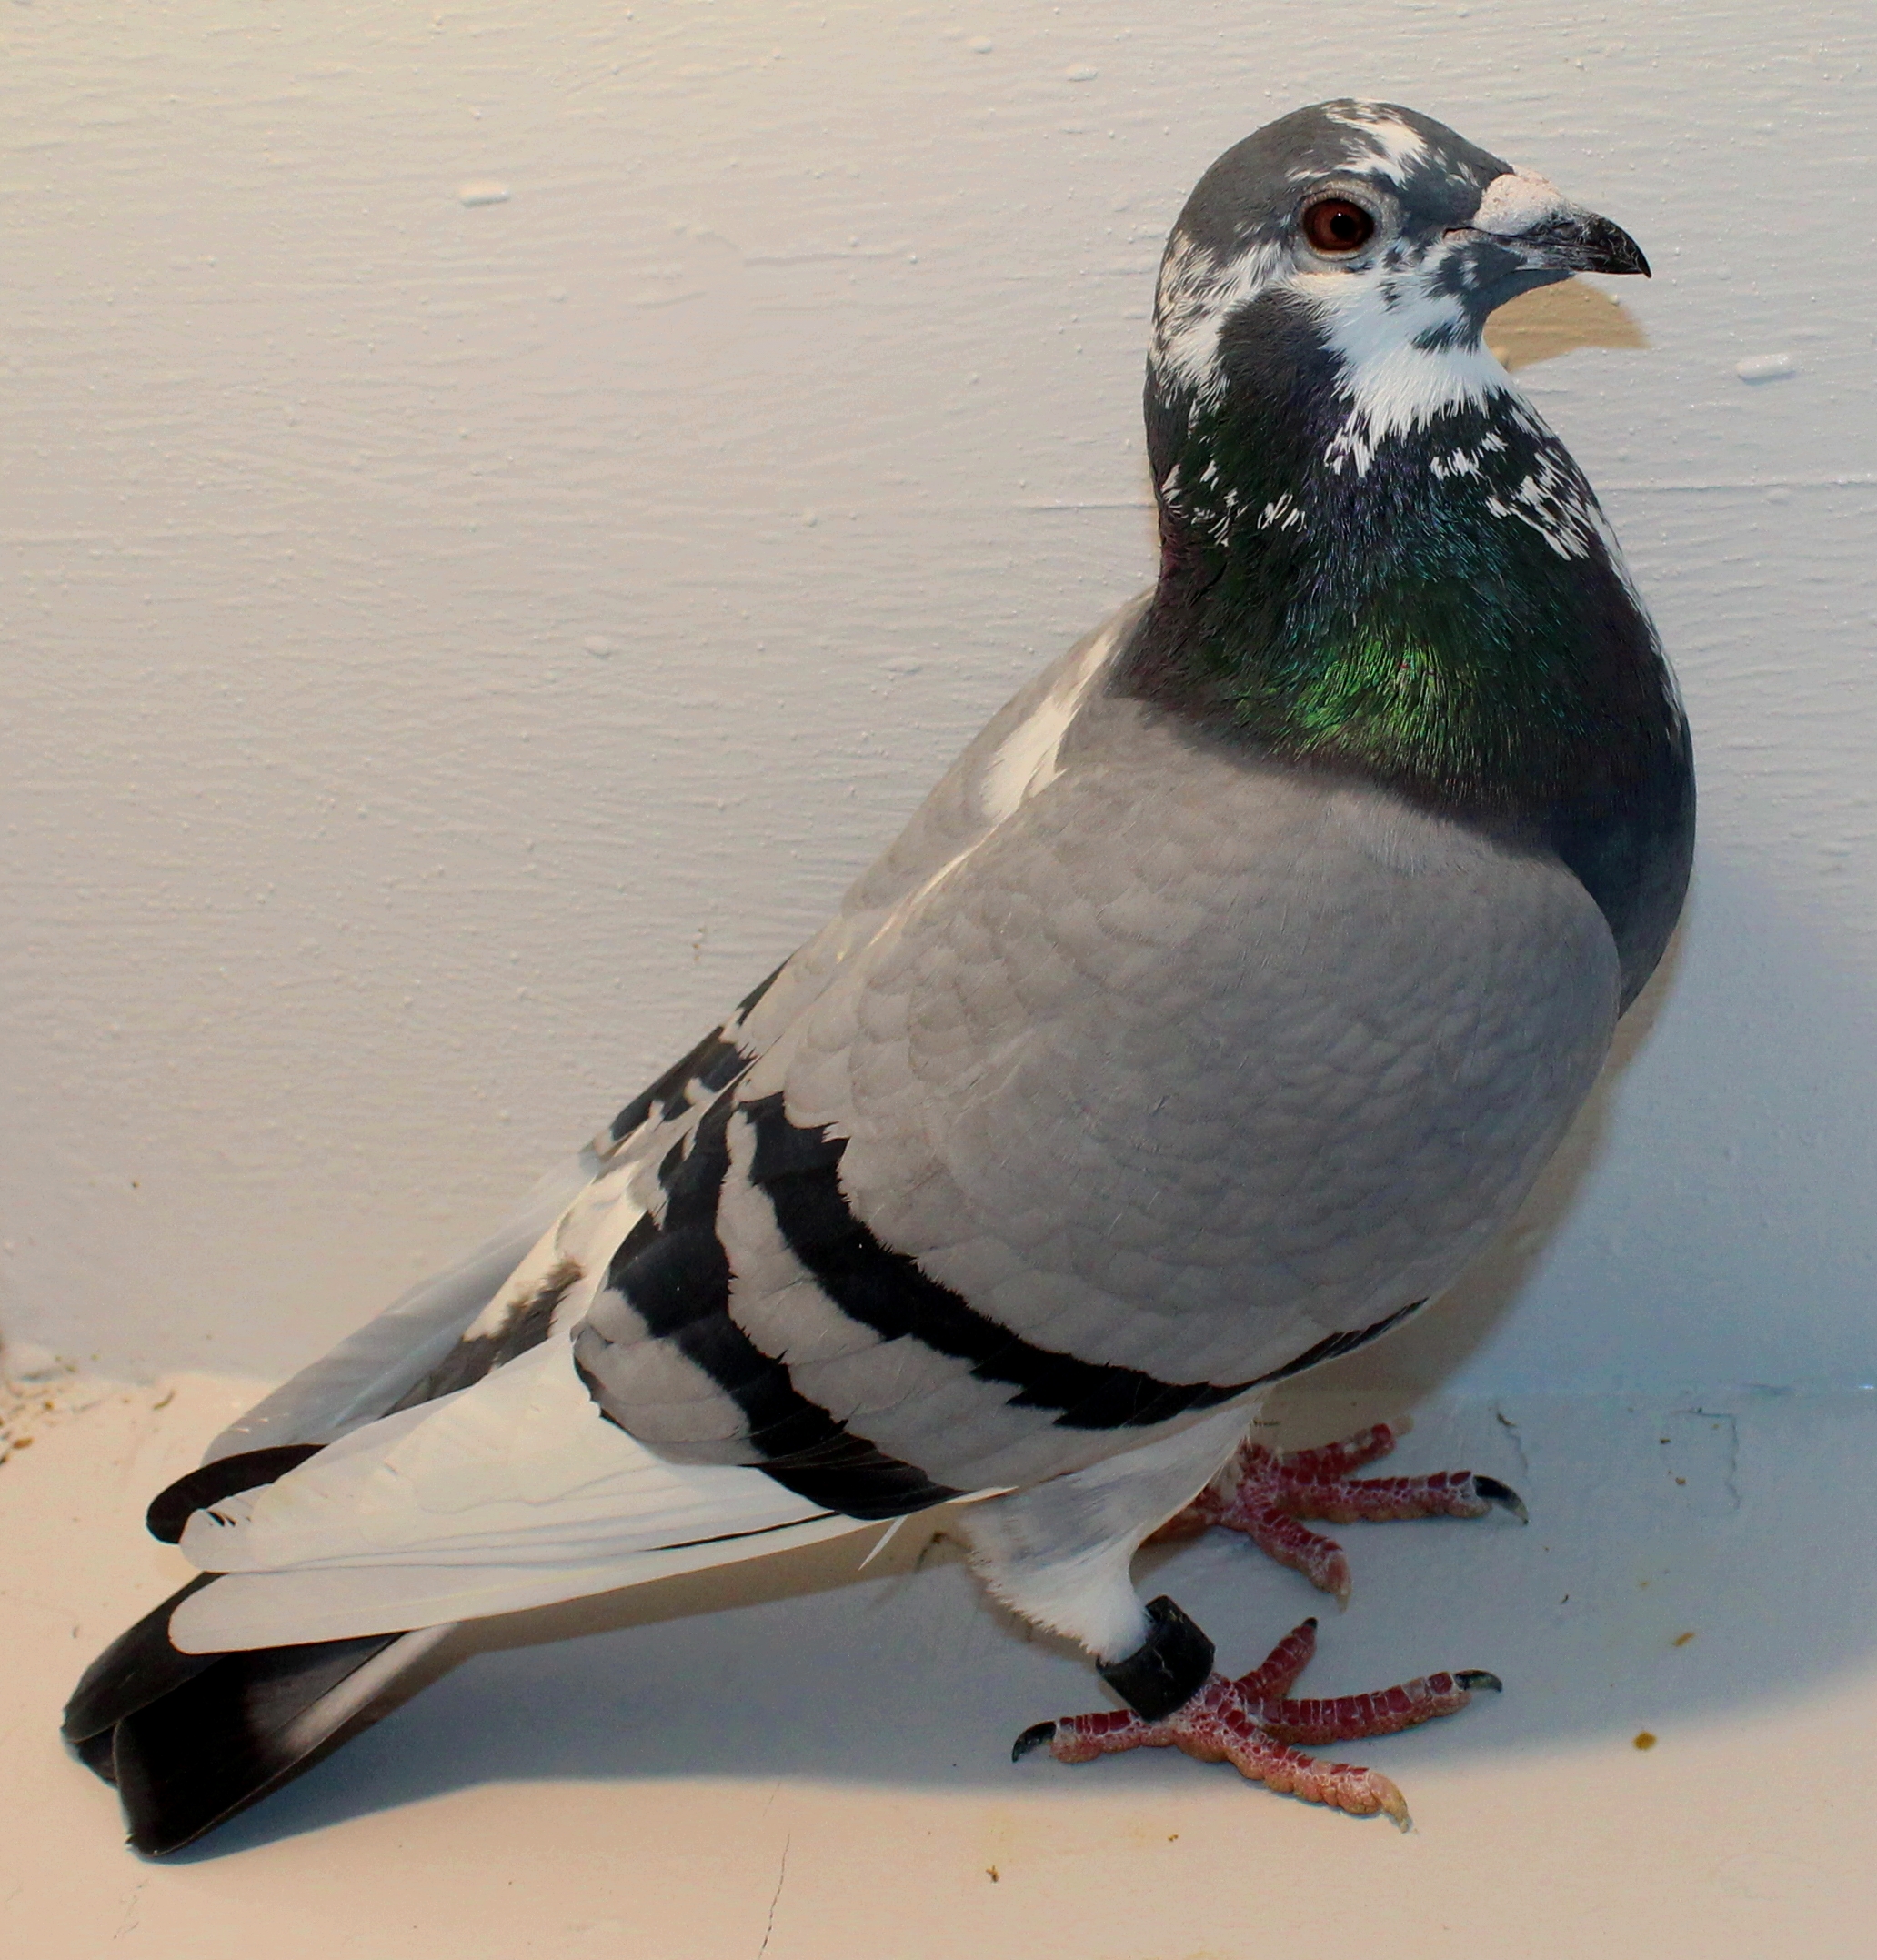 History on What Breeds Made the Racing Pigeon (1)